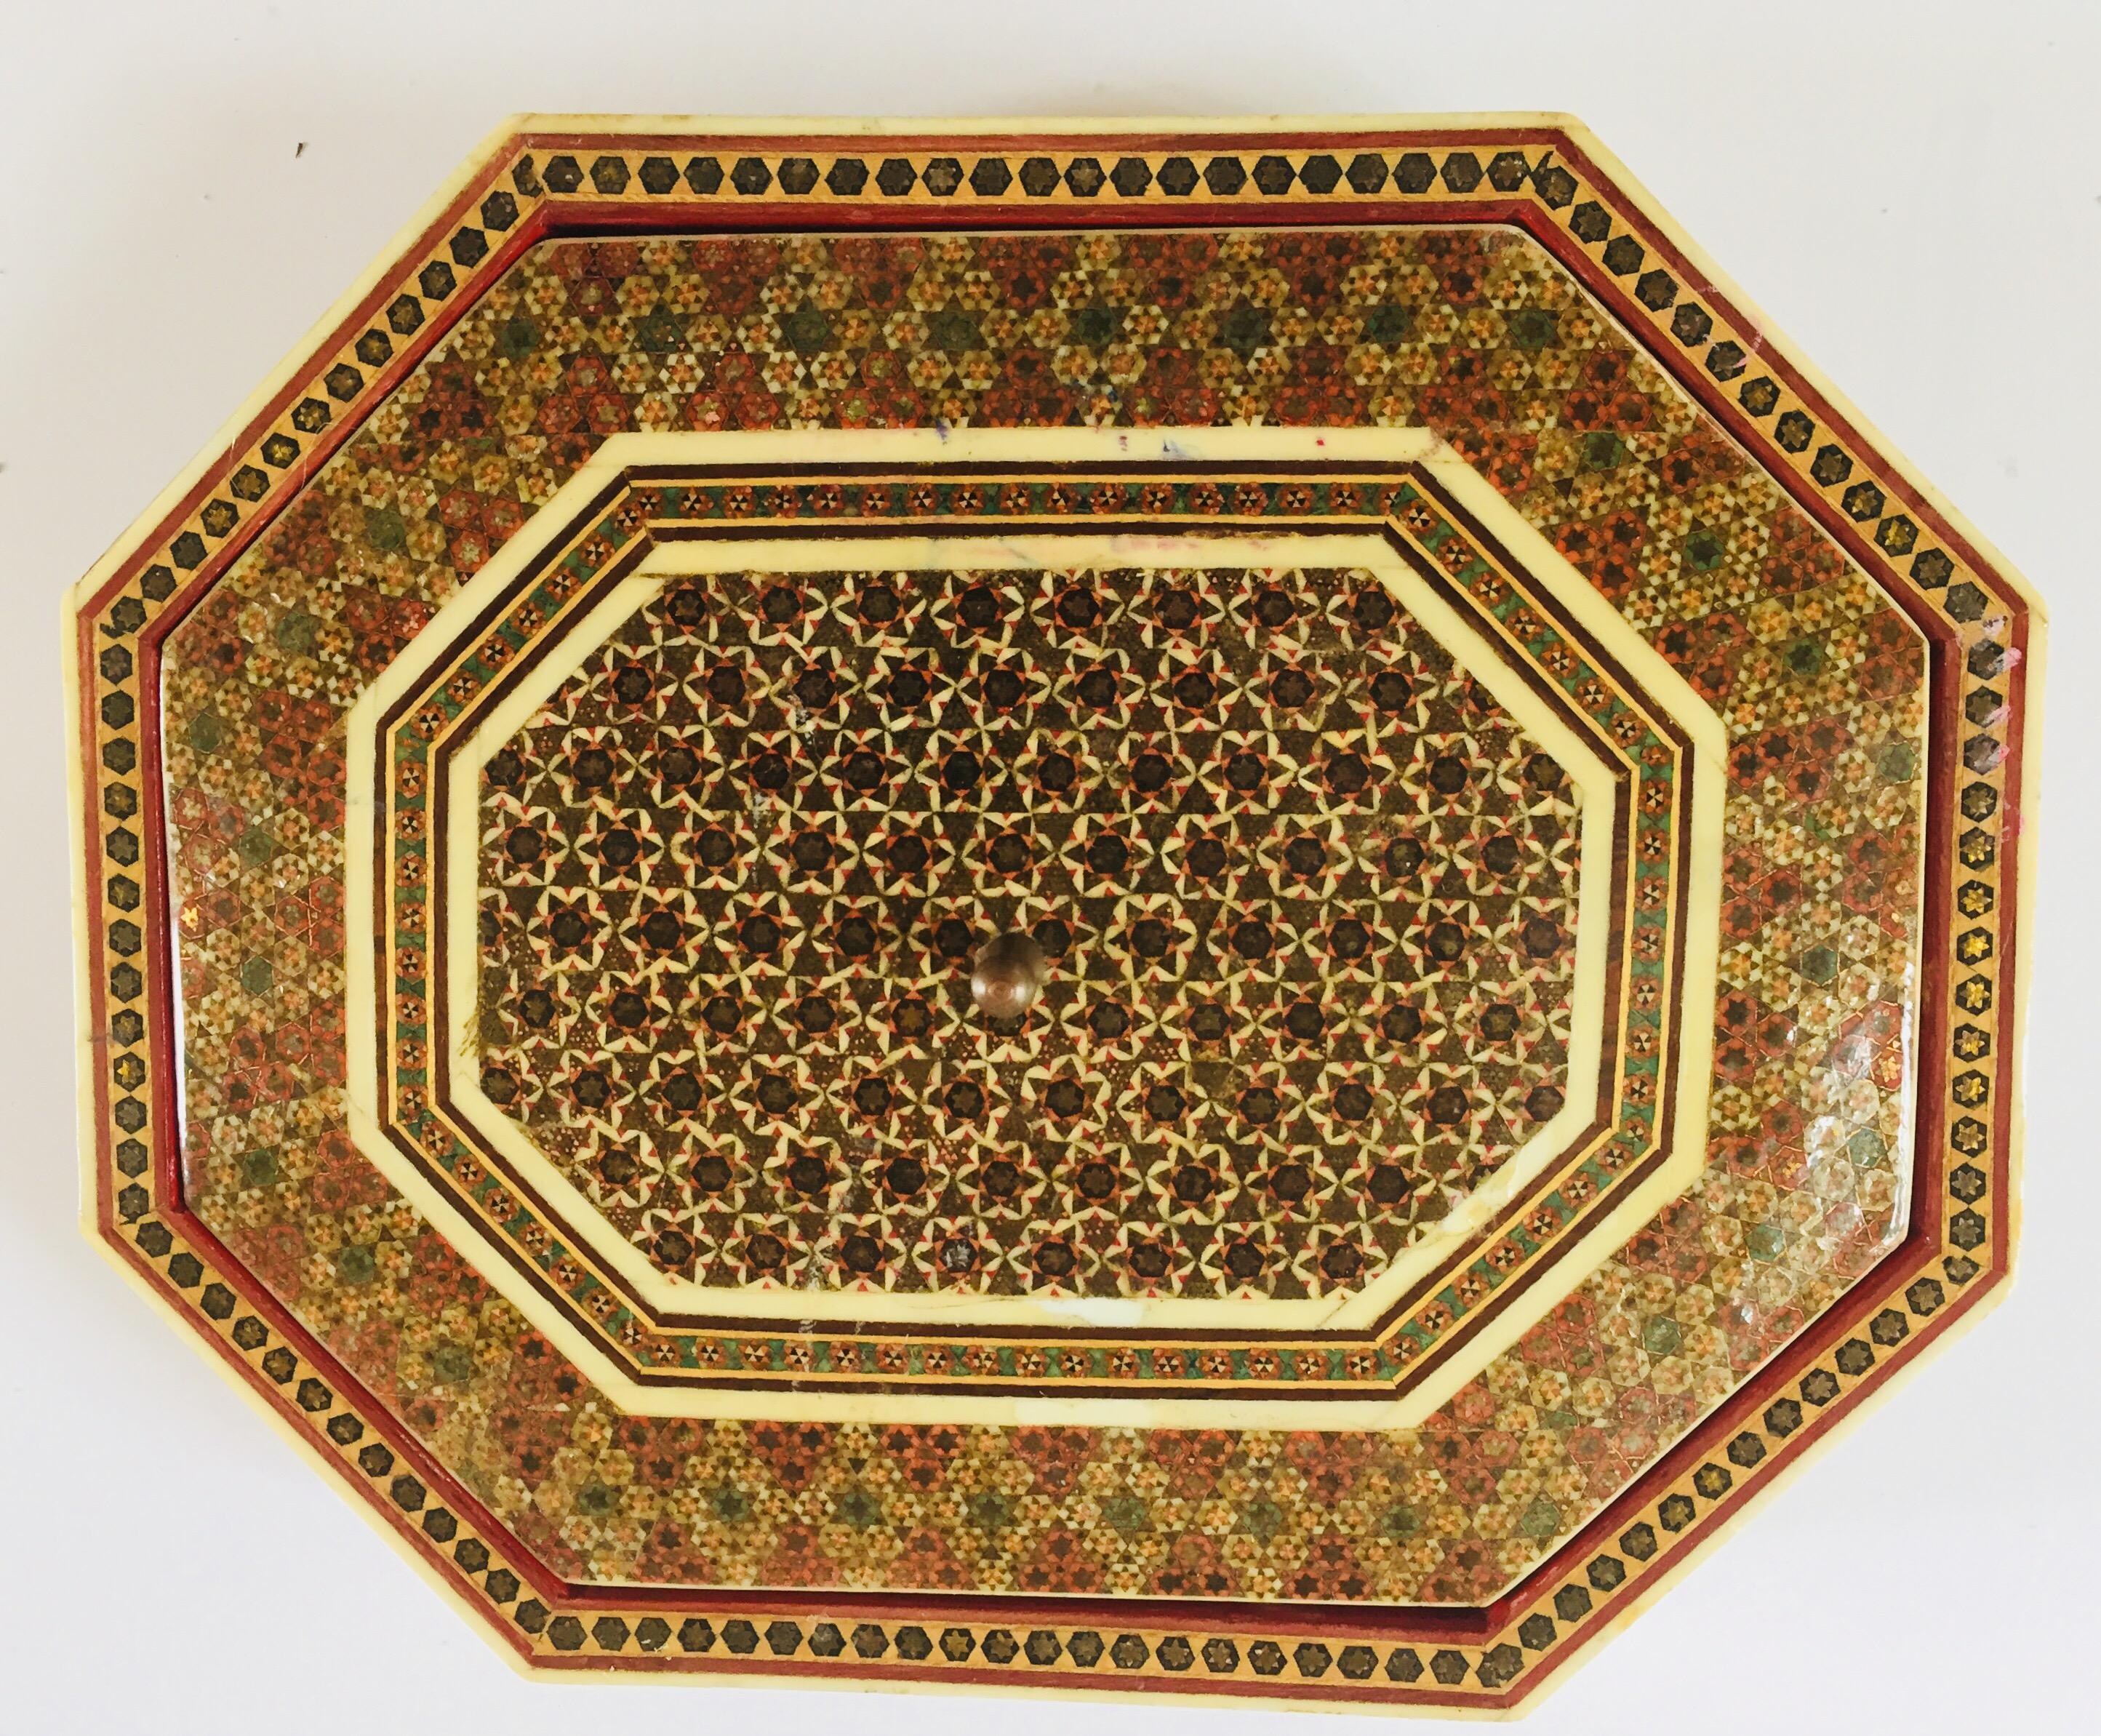 Anglo-Persian micro mosaic octagonal marquetry inlaid box with floral and geometric design, with a cover.
Handcrafted Khatam wooden box with very delicate micro mosaic marquetry from the ancient Persian technique of inlaying from arrangements of so